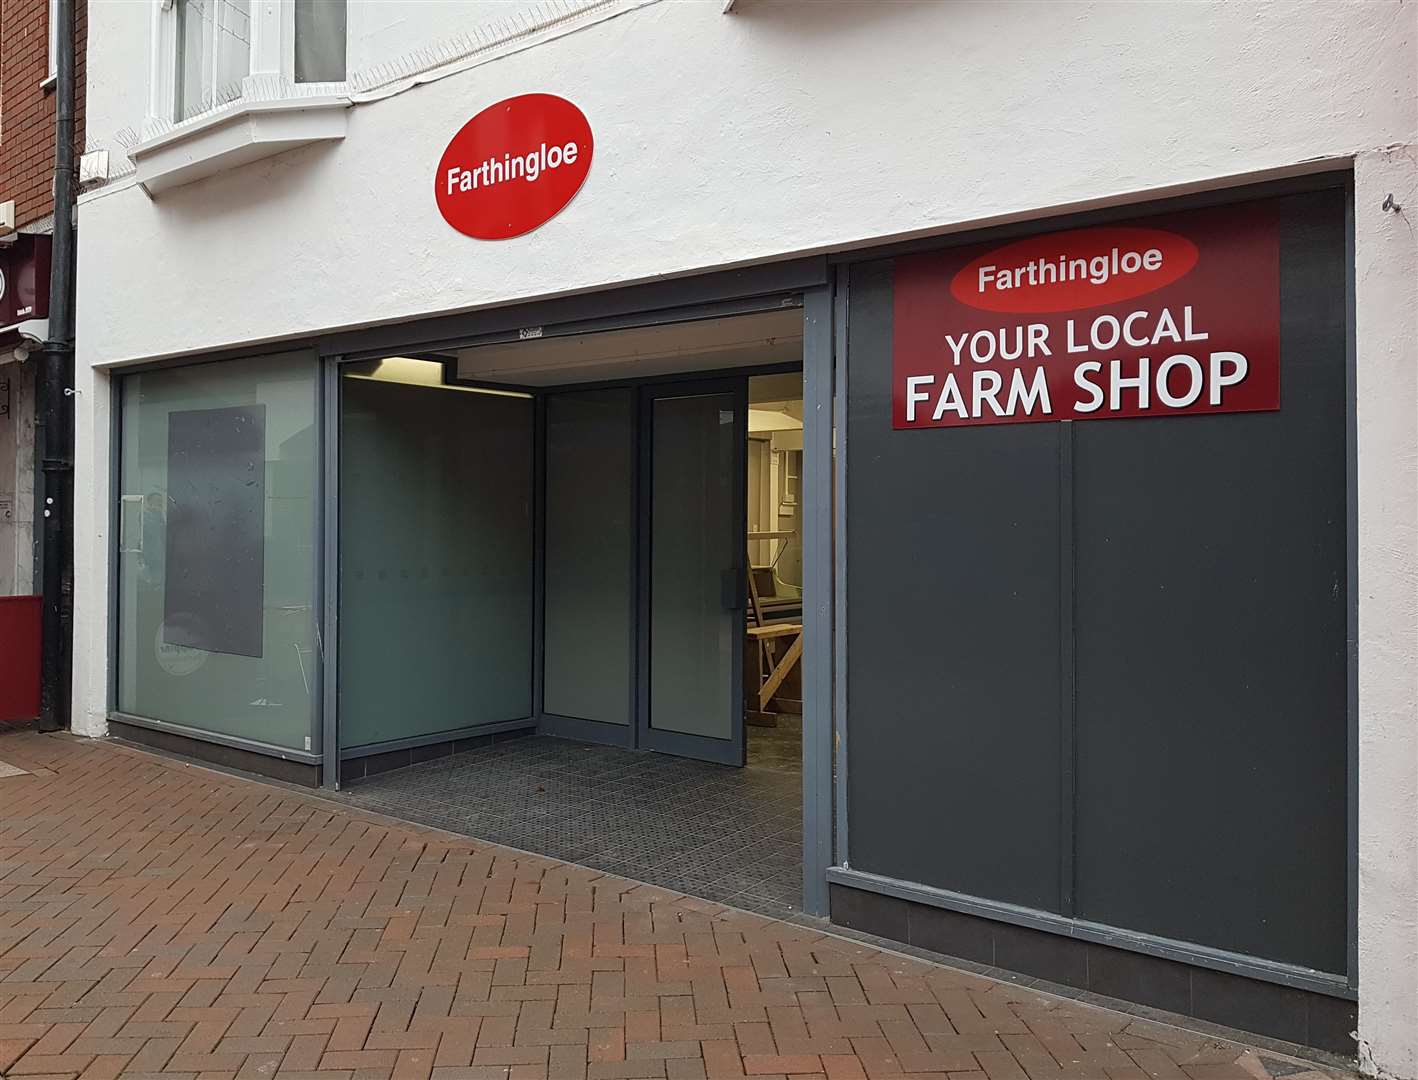 The bakery at Farthingloe in the high street will open on Friday